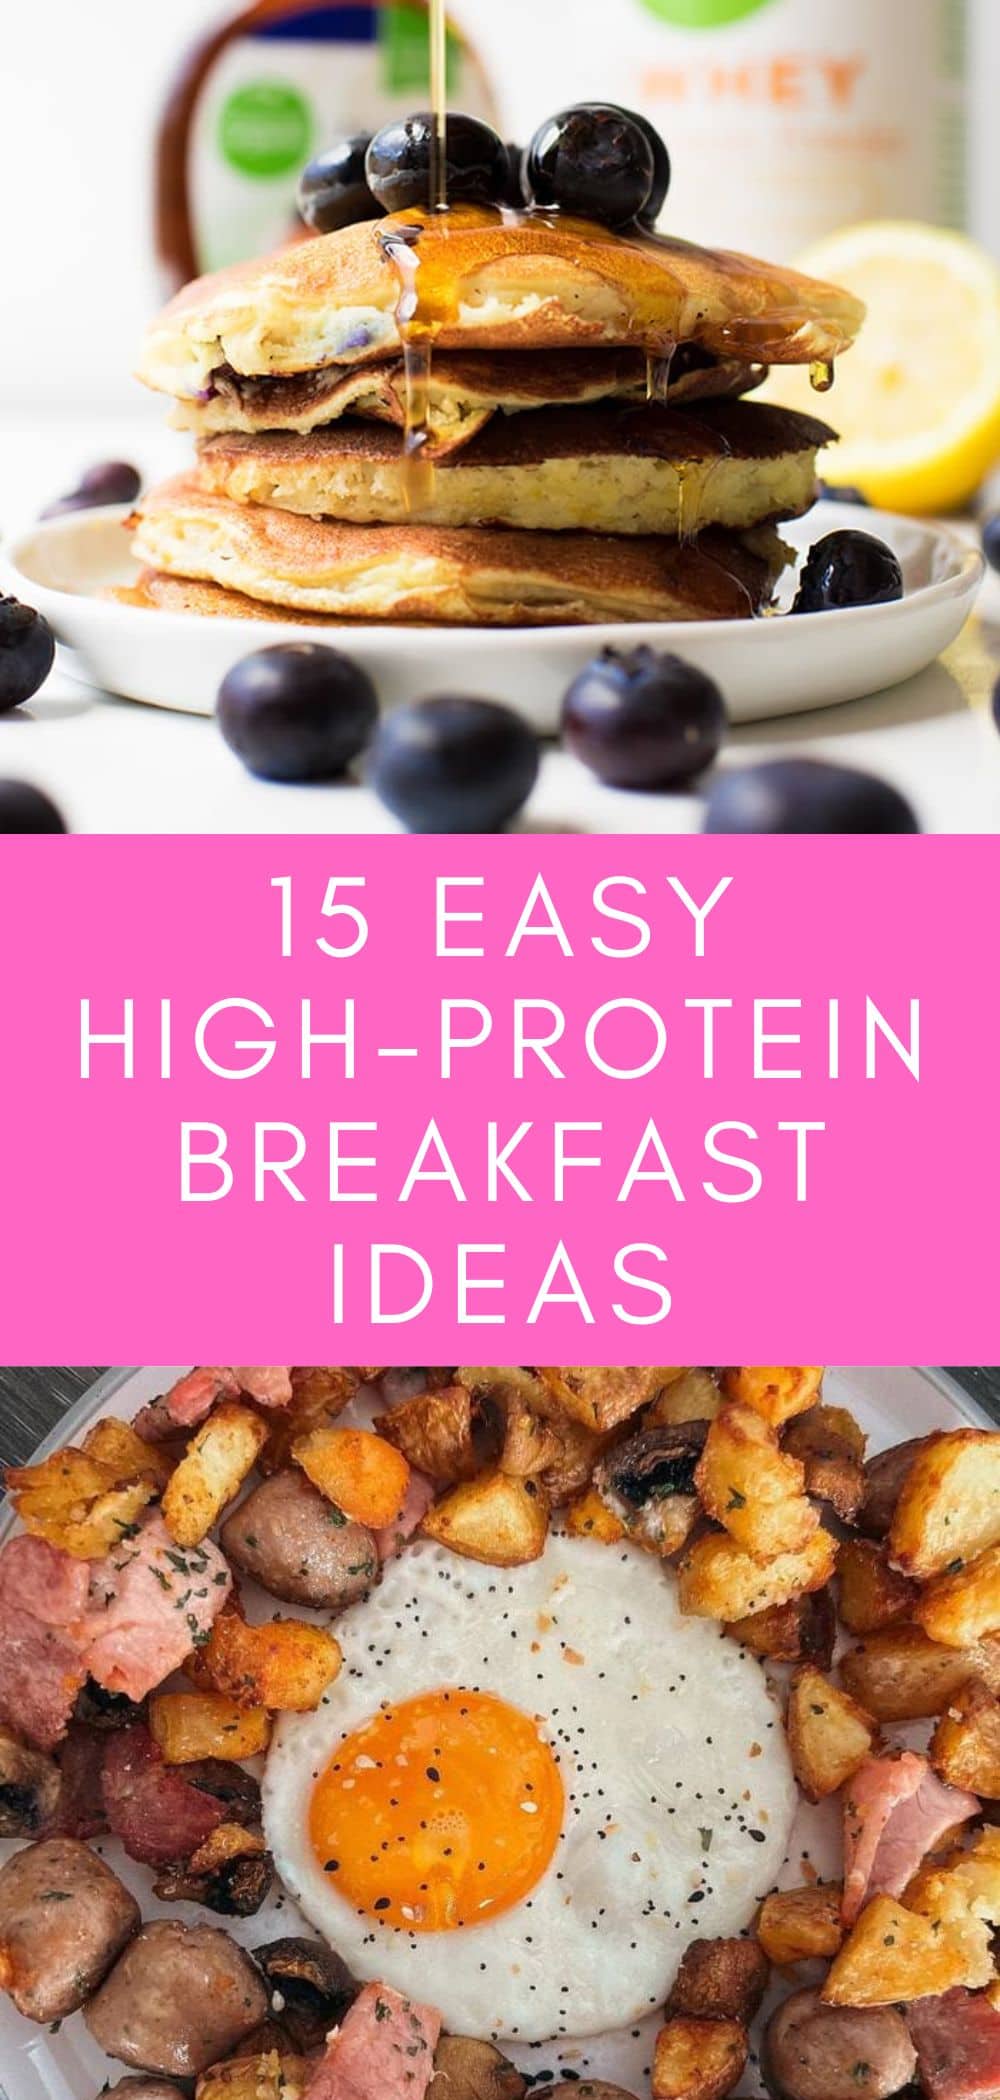 15 Quick and Easy High-Protein Breakfast Ideas - Let's Eat Cake